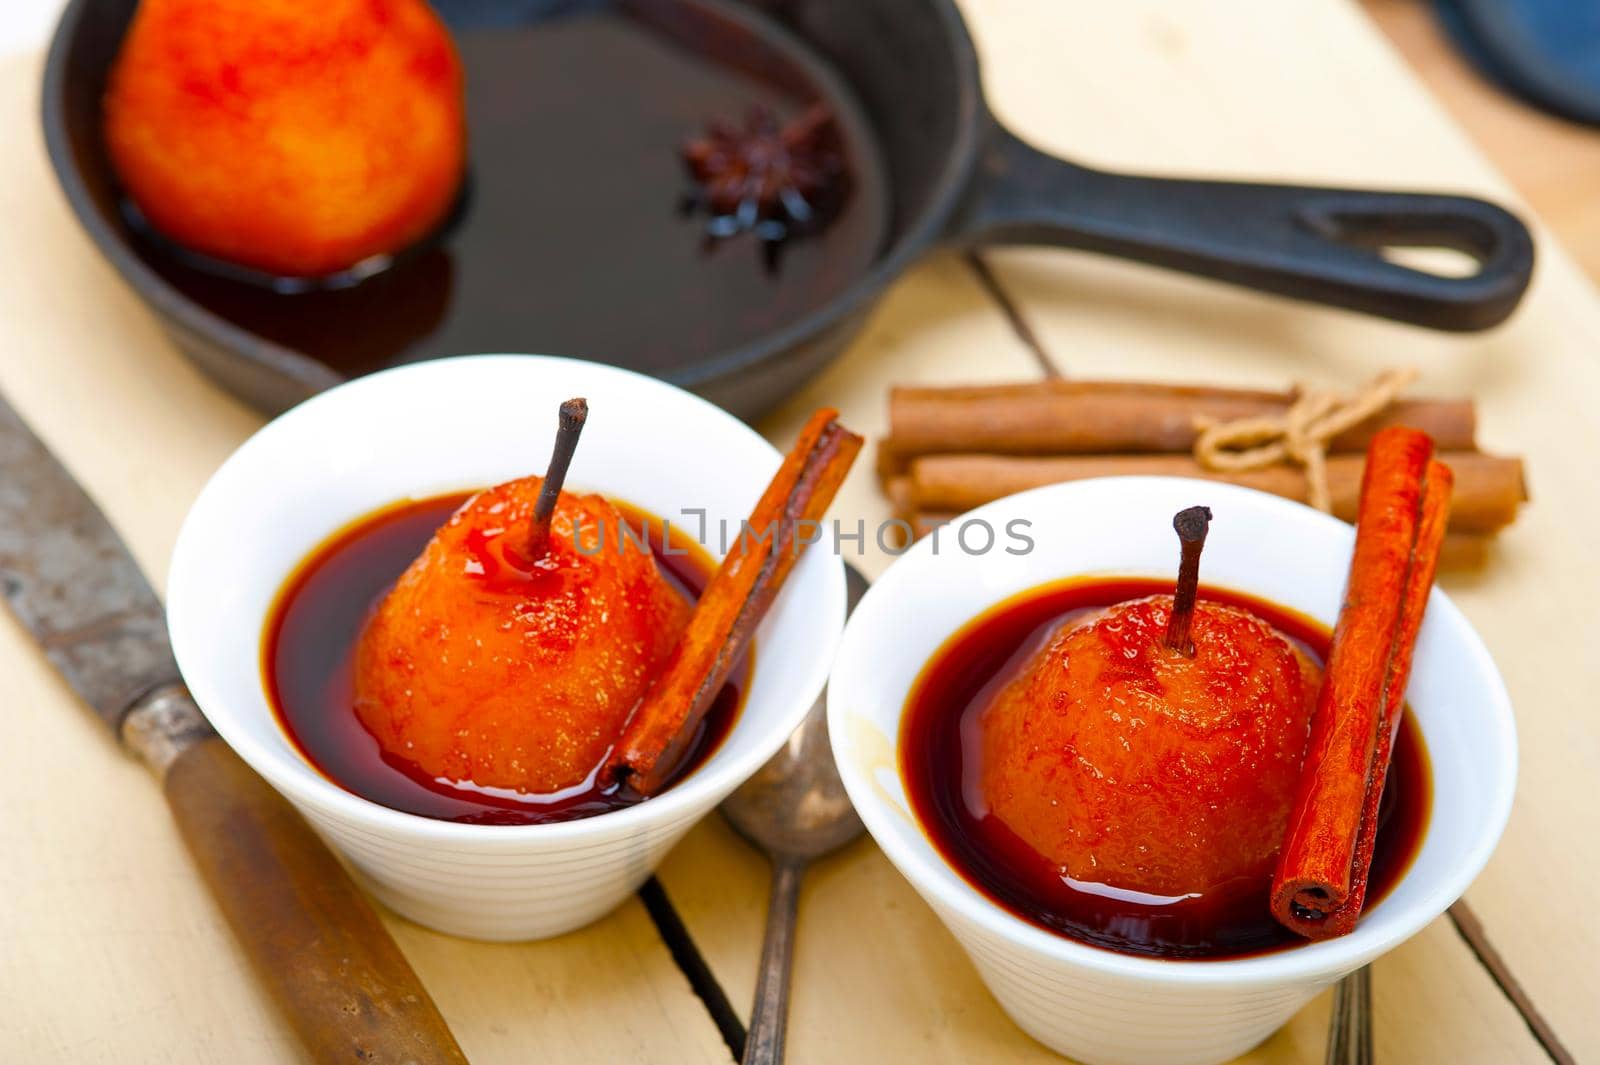 poached pears delicious home made recipe  by keko64